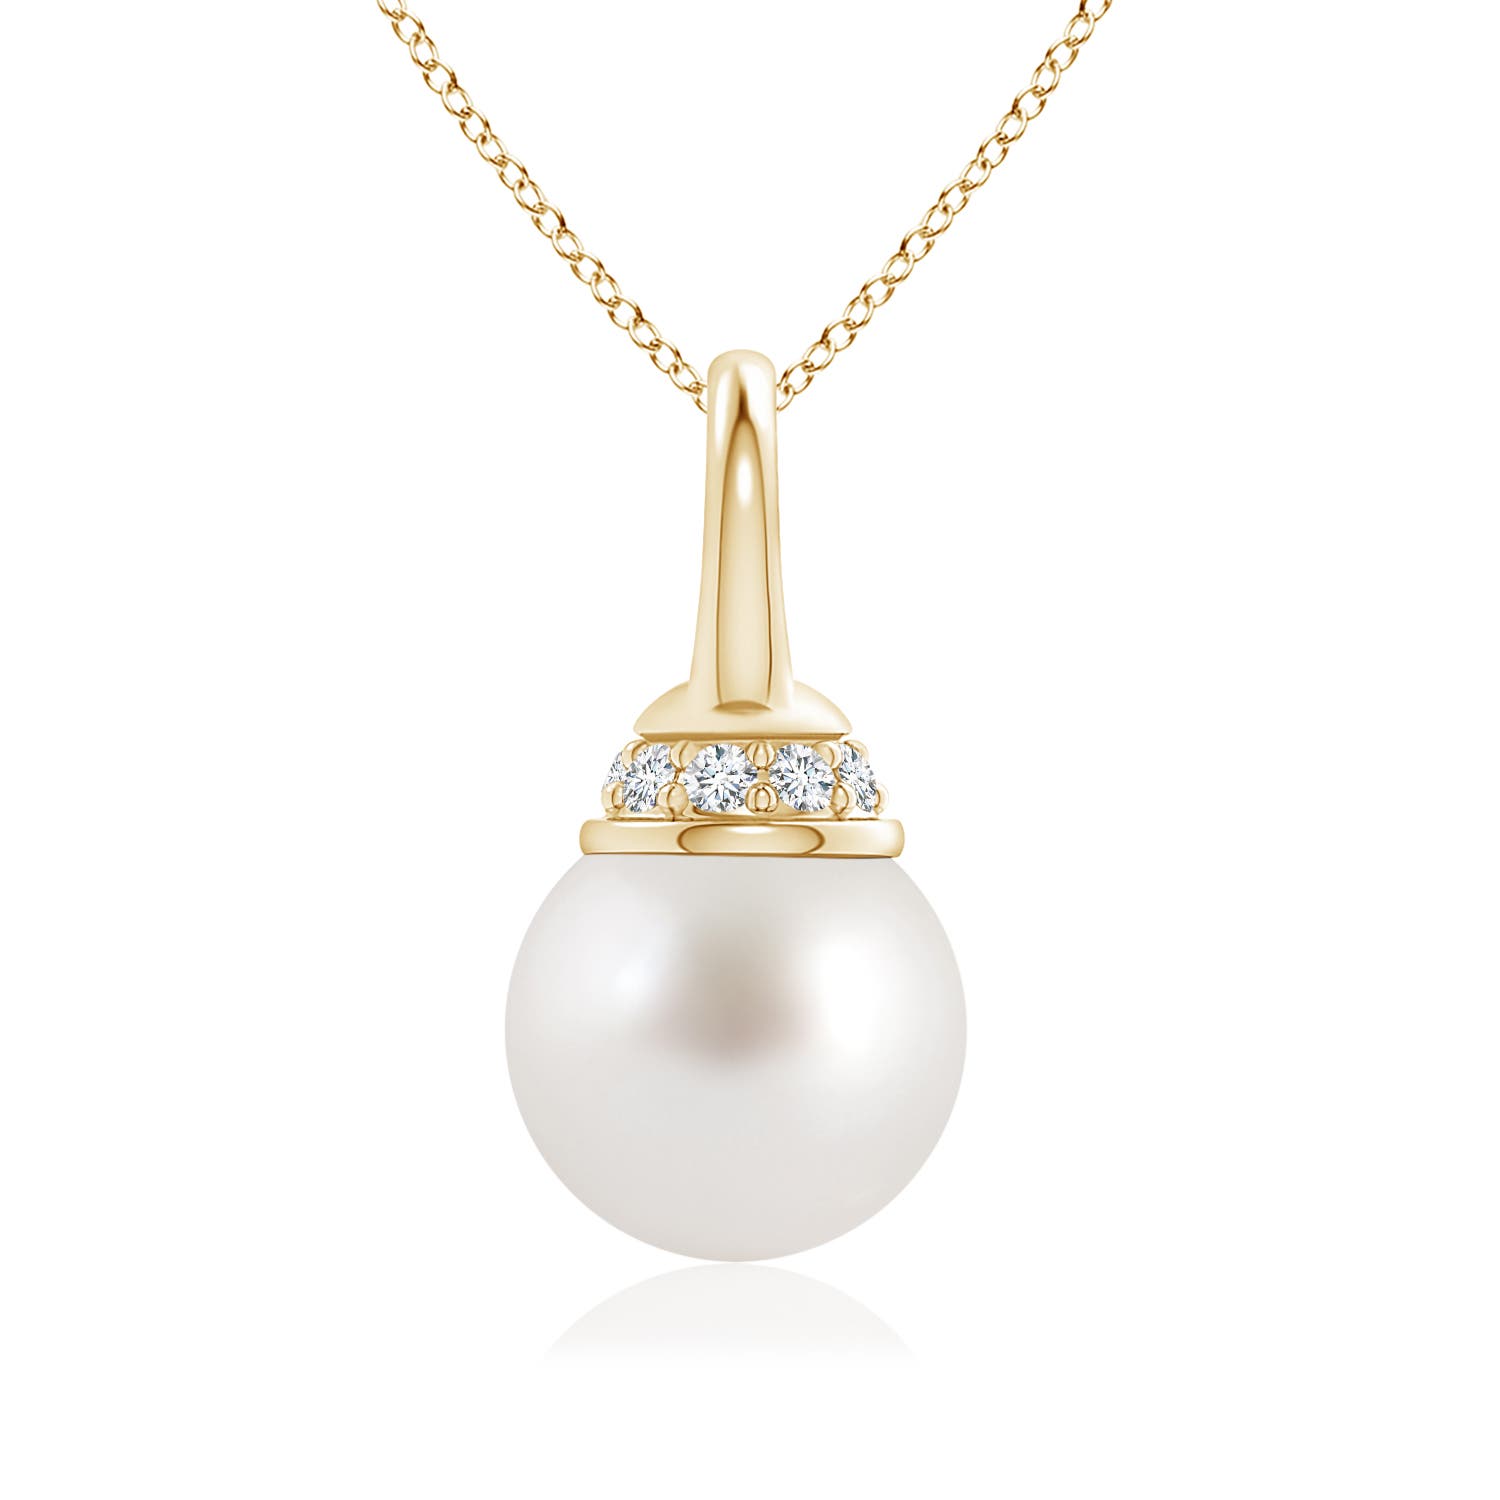 AAA - South Sea Cultured Pearl / 3.79 CT / 14 KT Yellow Gold